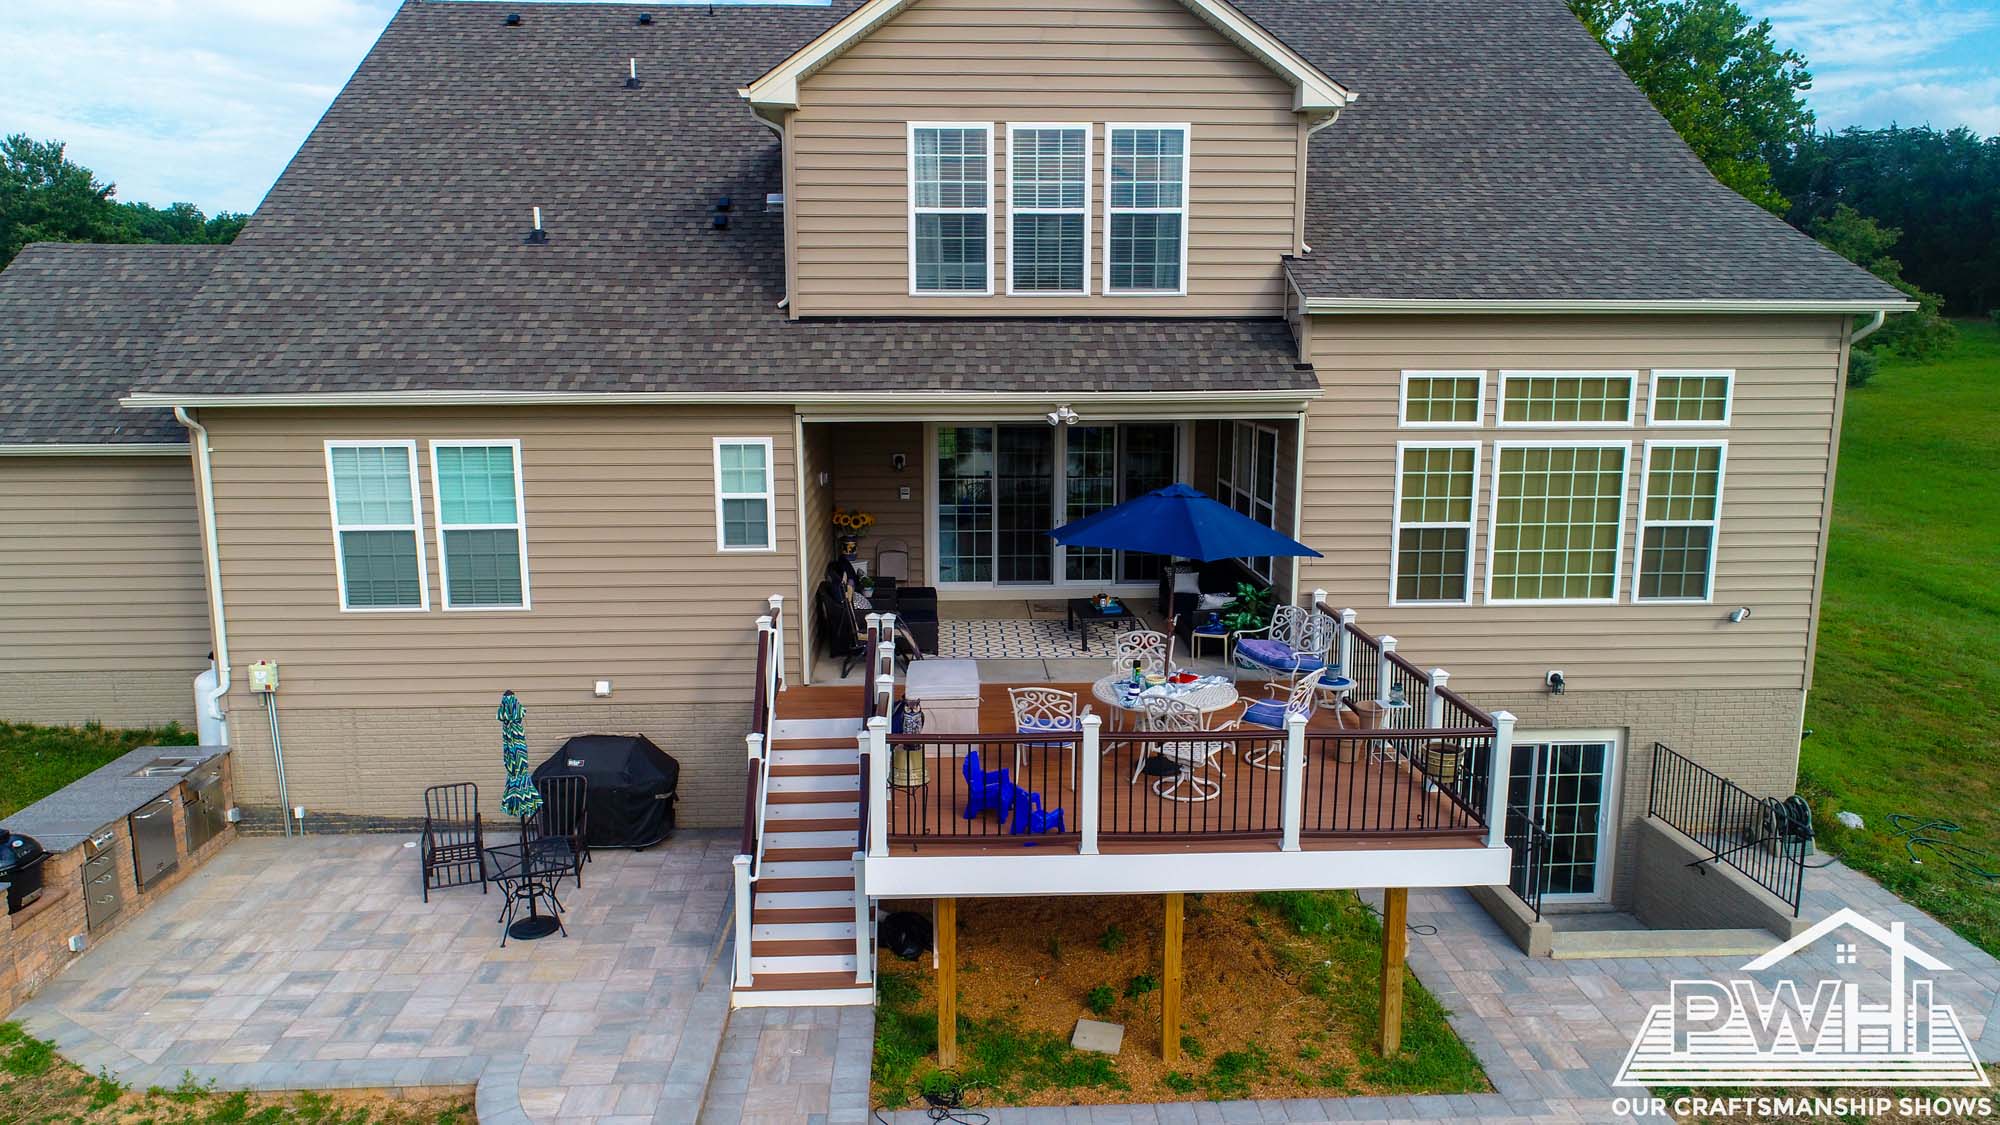 Why You Should Consider a Patio Expansion for Your Home